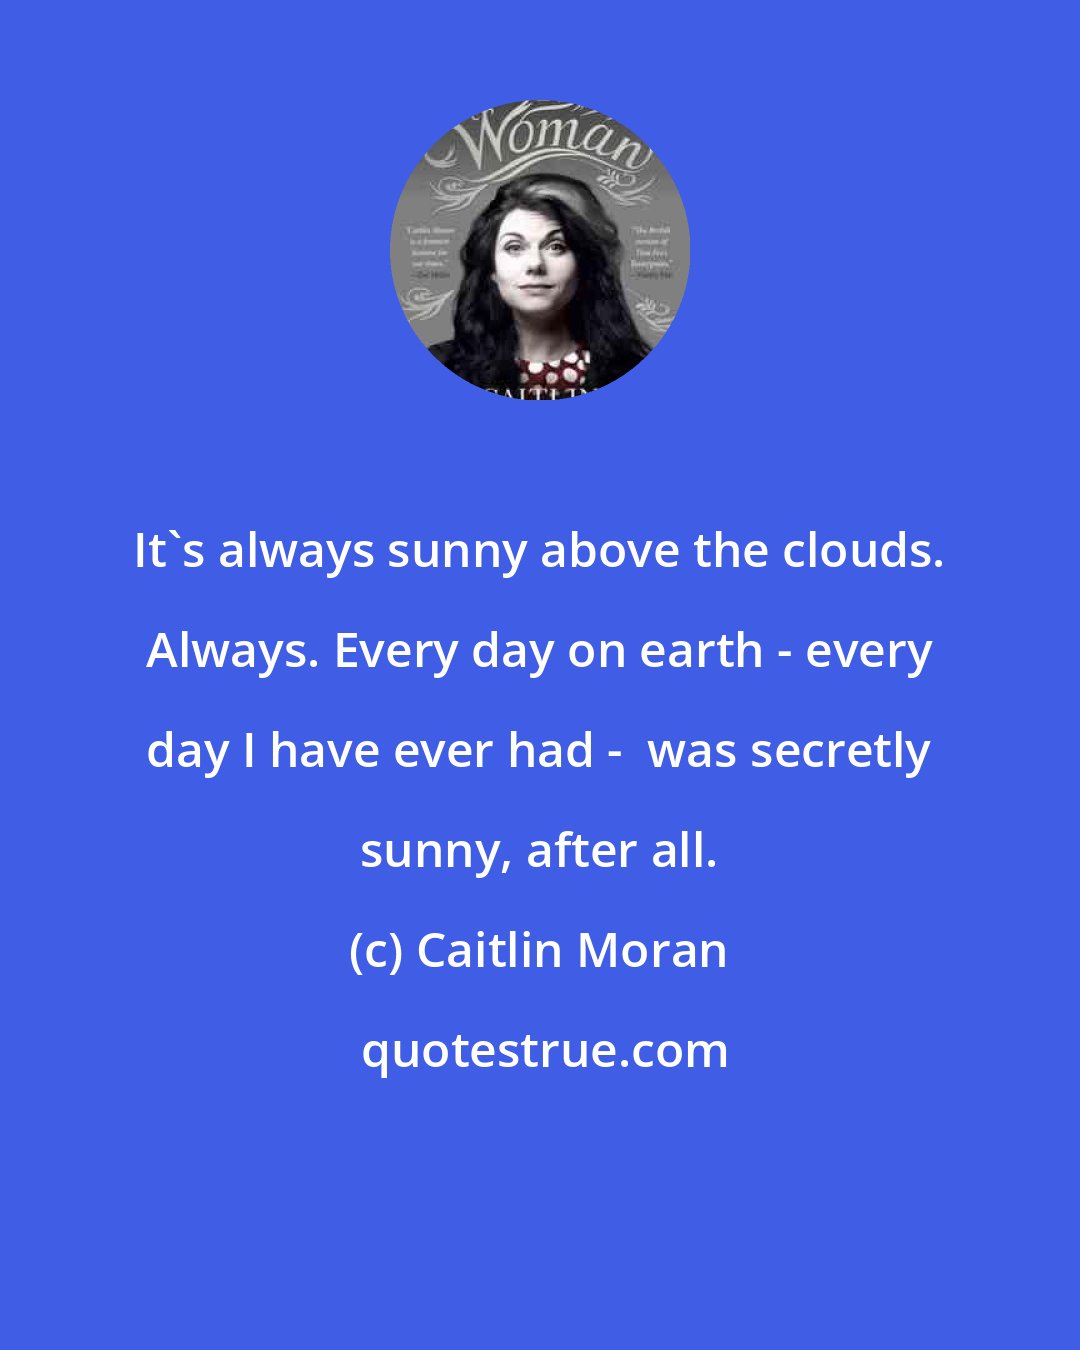 Caitlin Moran: It's always sunny above the clouds. Always. Every day on earth - every day I have ever had -  was secretly sunny, after all.